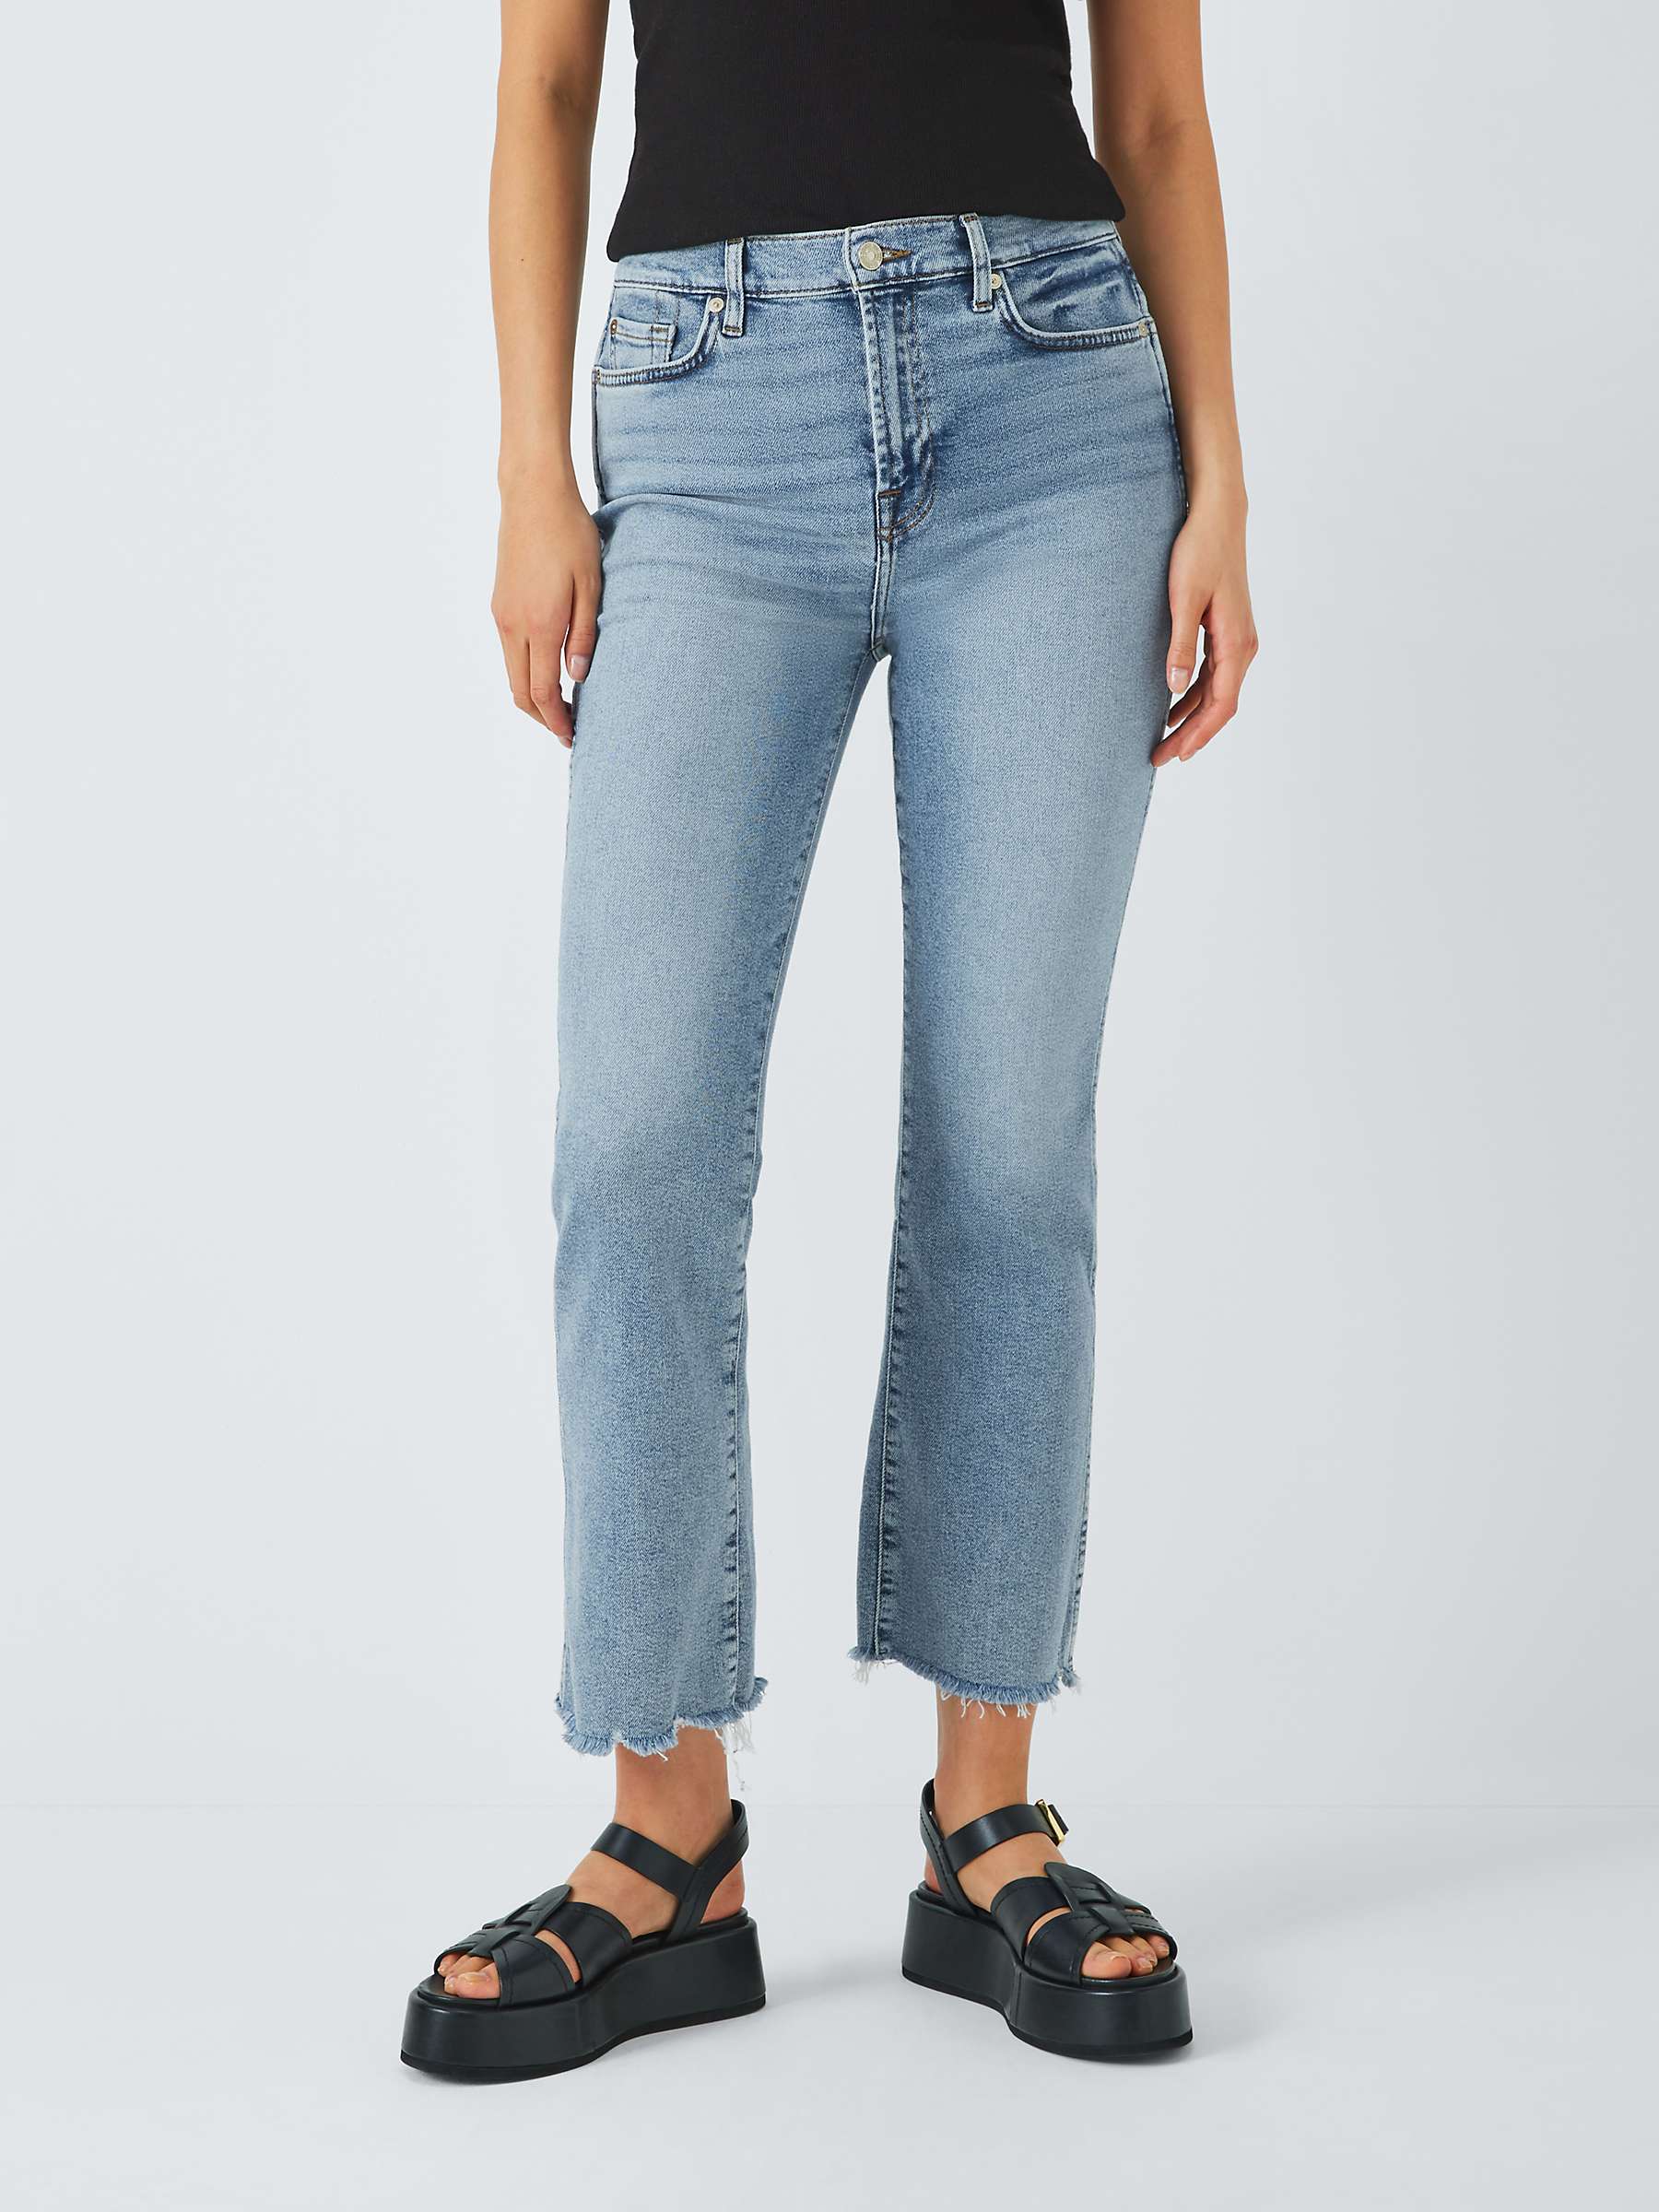 Buy 7 For All Mankind High Waist Slim Kick Jeans, Luxe Vintage Love Soul Online at johnlewis.com